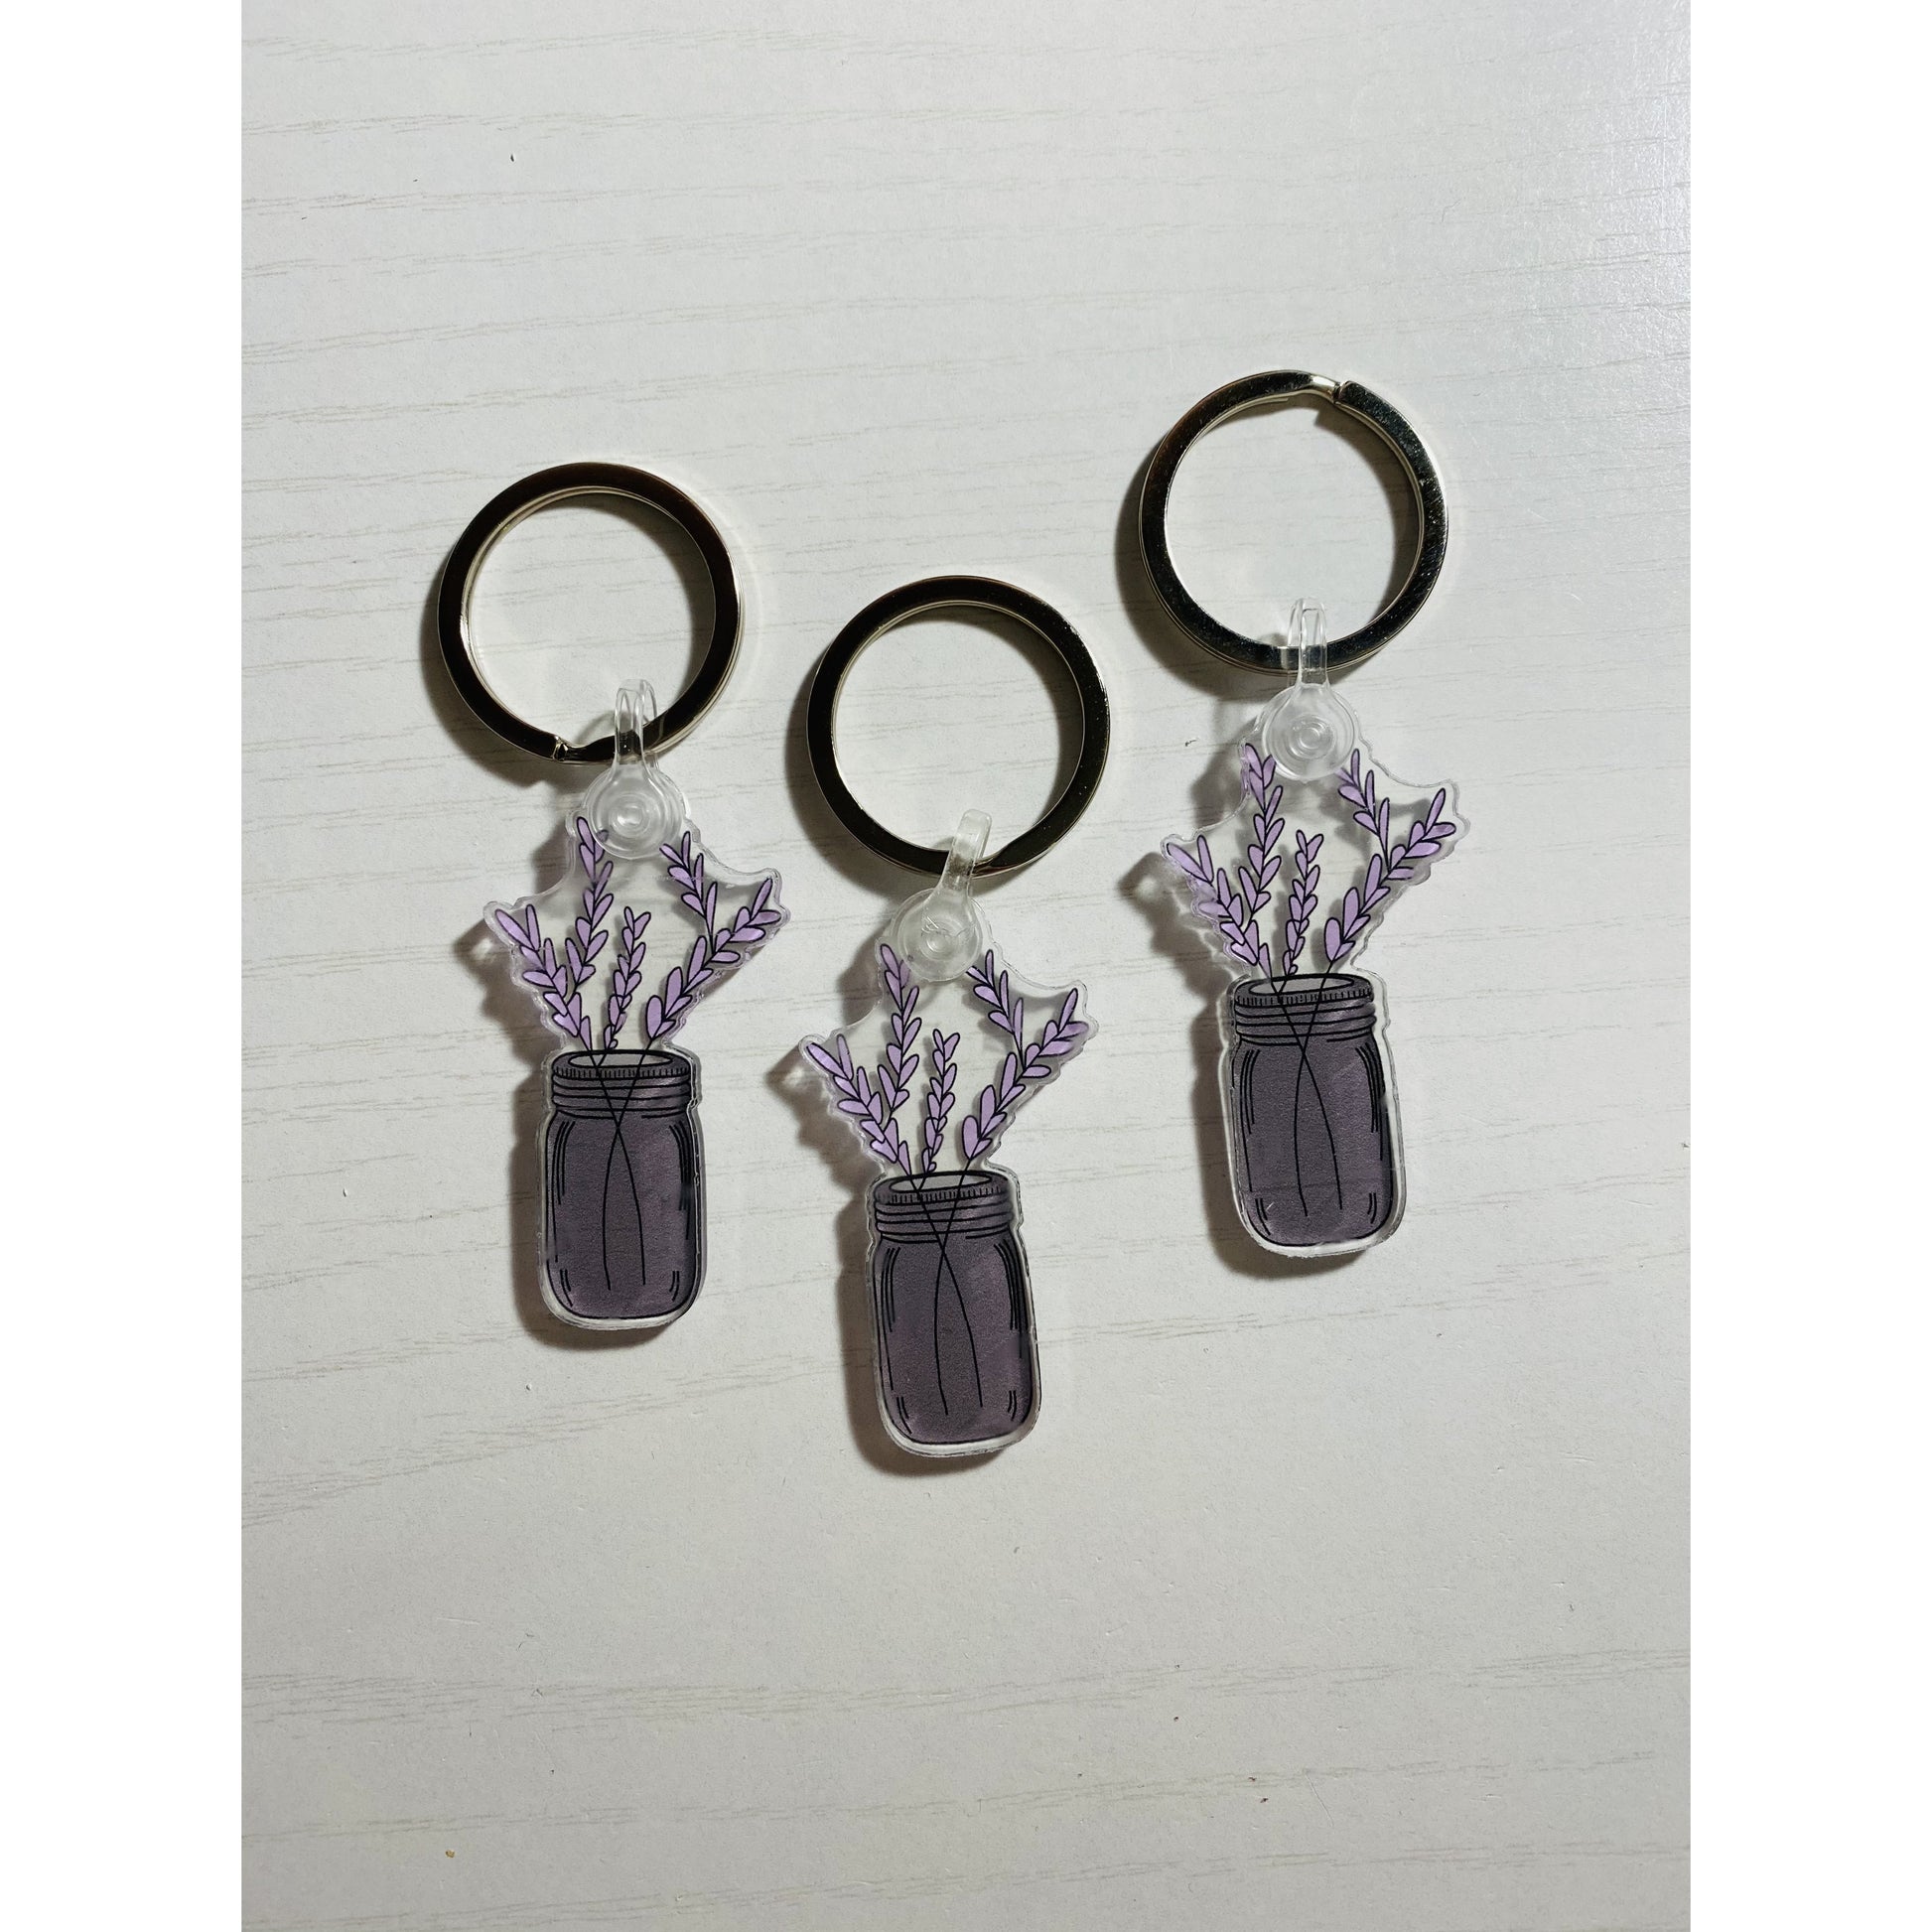 Lavender Keychain | Brenna M & Co | Brenna M and Co | Clear Keychain | Accessories | Keychain Accessories | Cute little Keychains | Lavender Flower | Lavender Flower Accessories